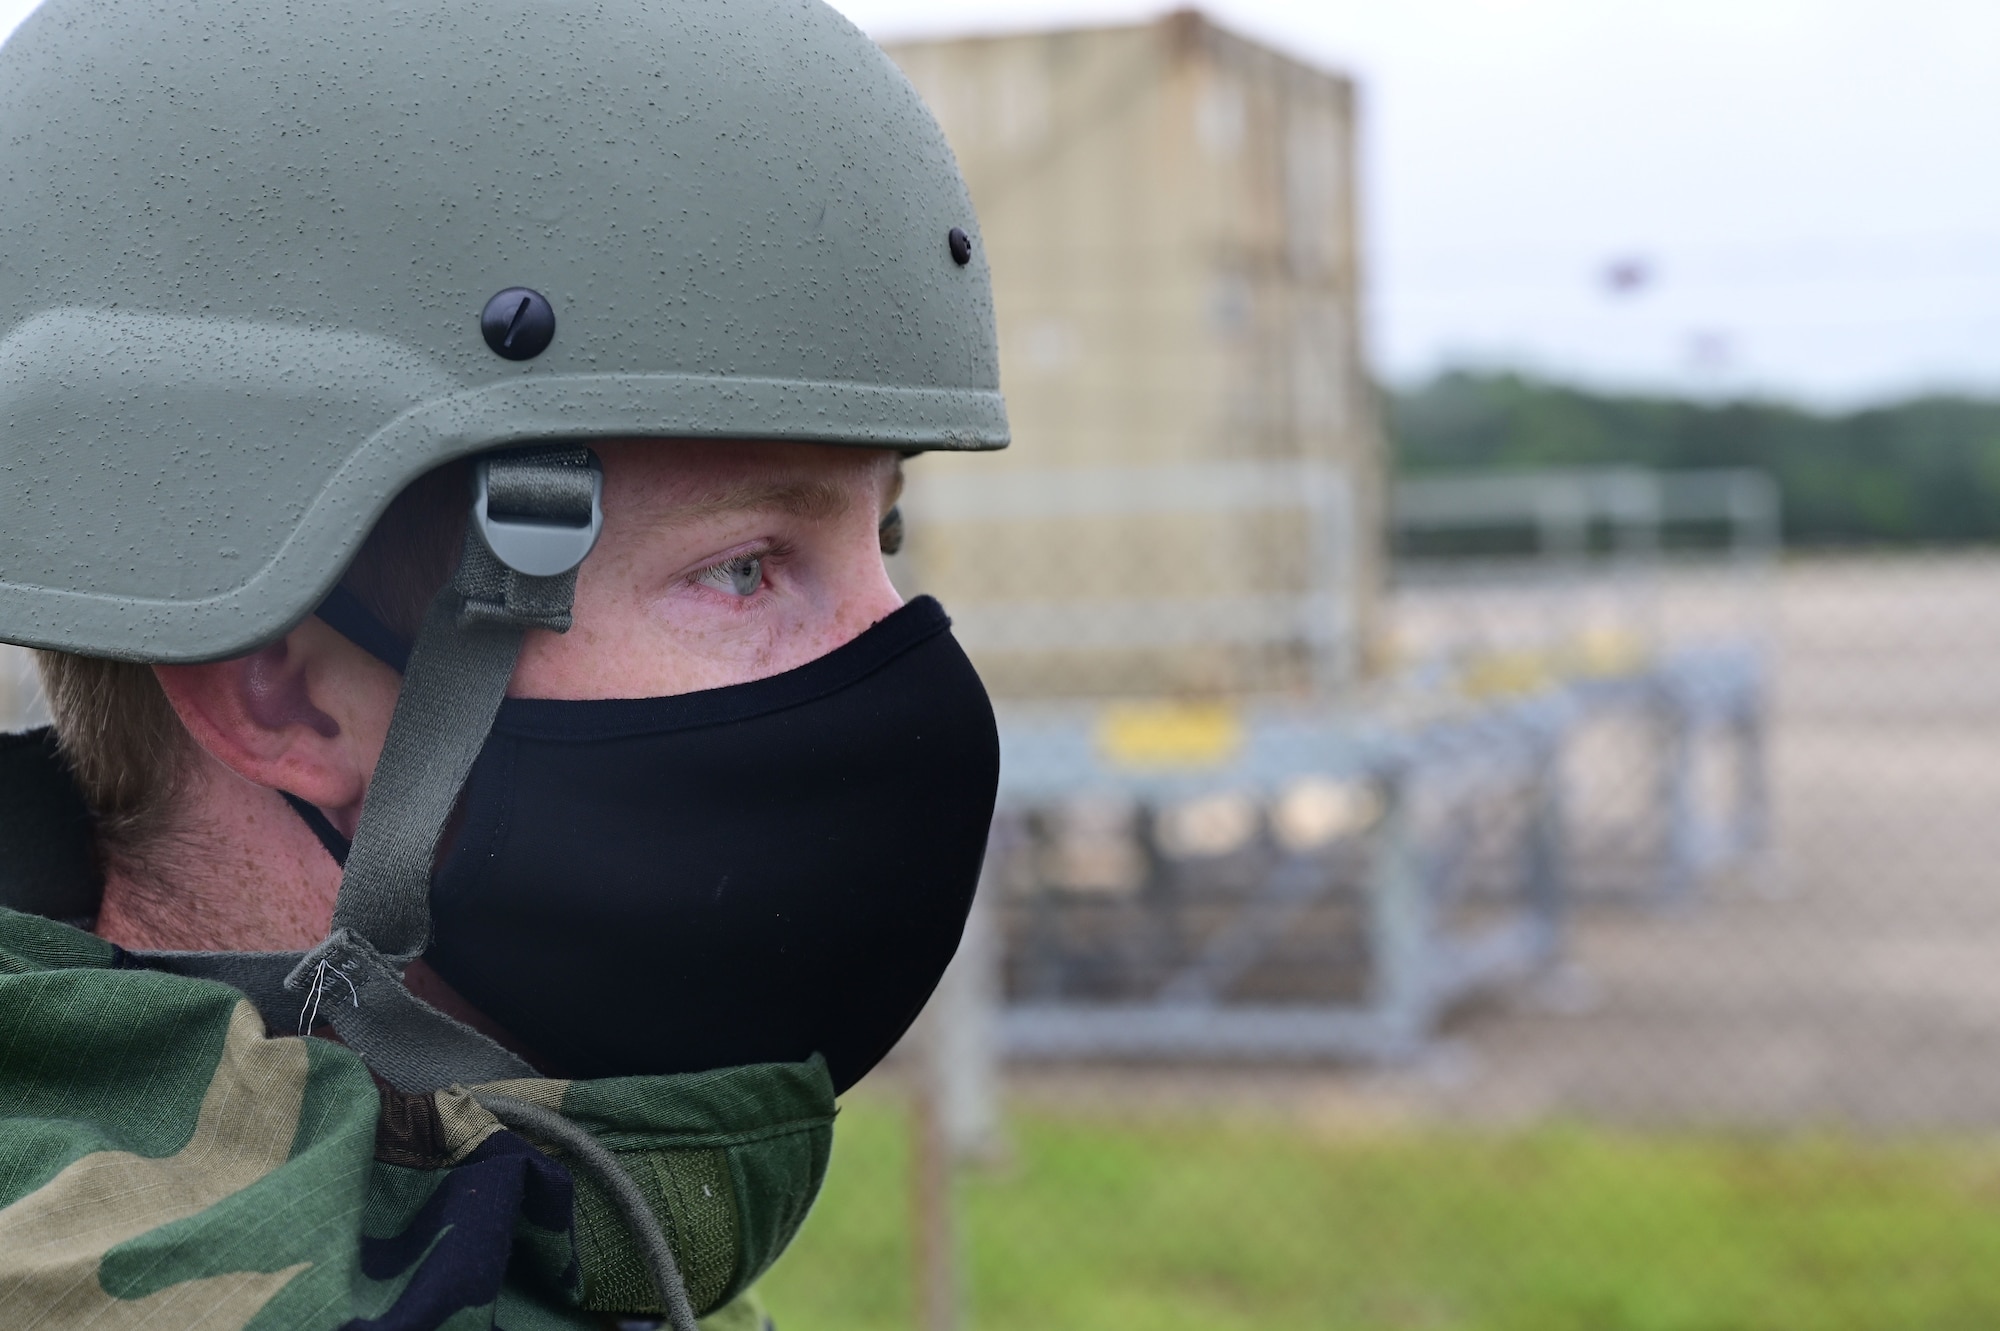 An Airman in a helmet looks off in the distance